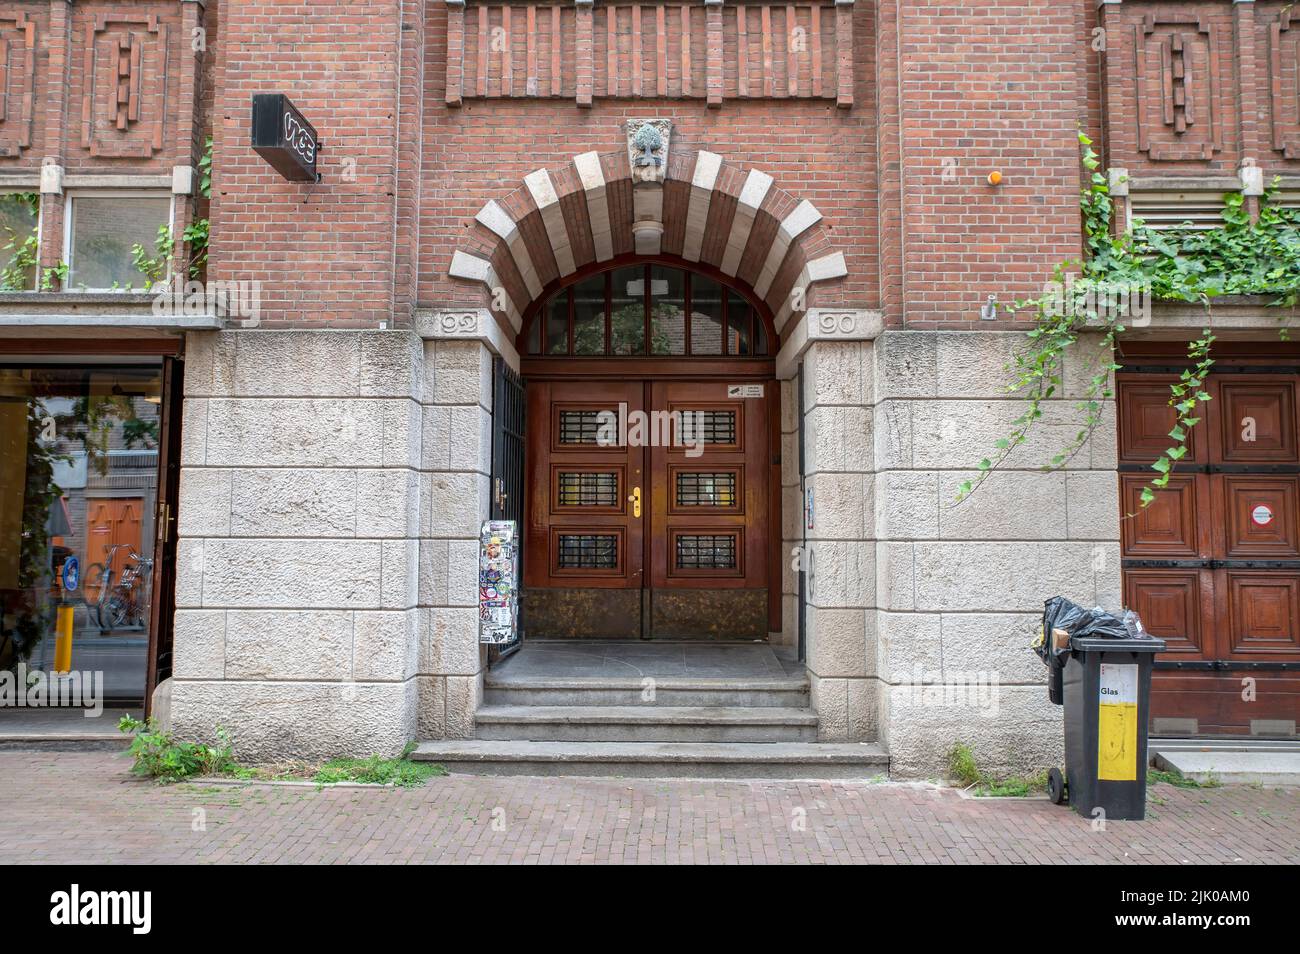 Entrance Vice Media Benelux Building At Amsterdam The Netherlands 25-7-2022  Stock Photo - Alamy